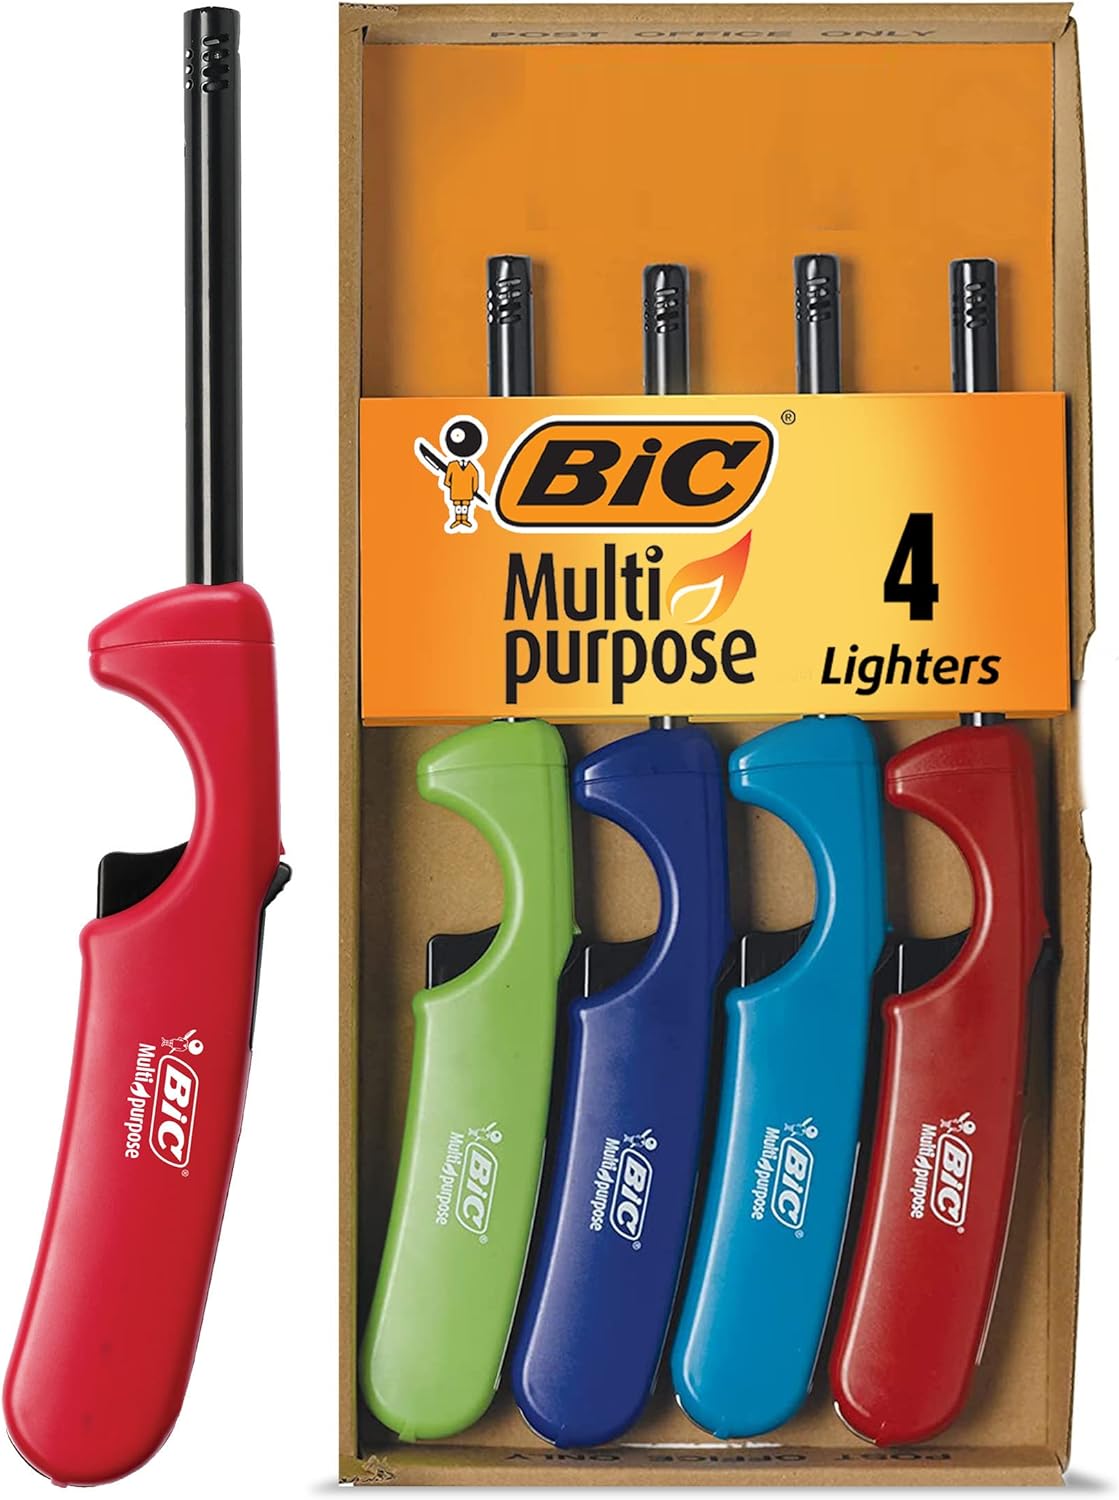 BIC Multi-purpose Classic Edition Candle Lighters, Long Durable Metal Wand, Great For Candles, Grills and Fireplaces, Assorted Colors, 4-Count